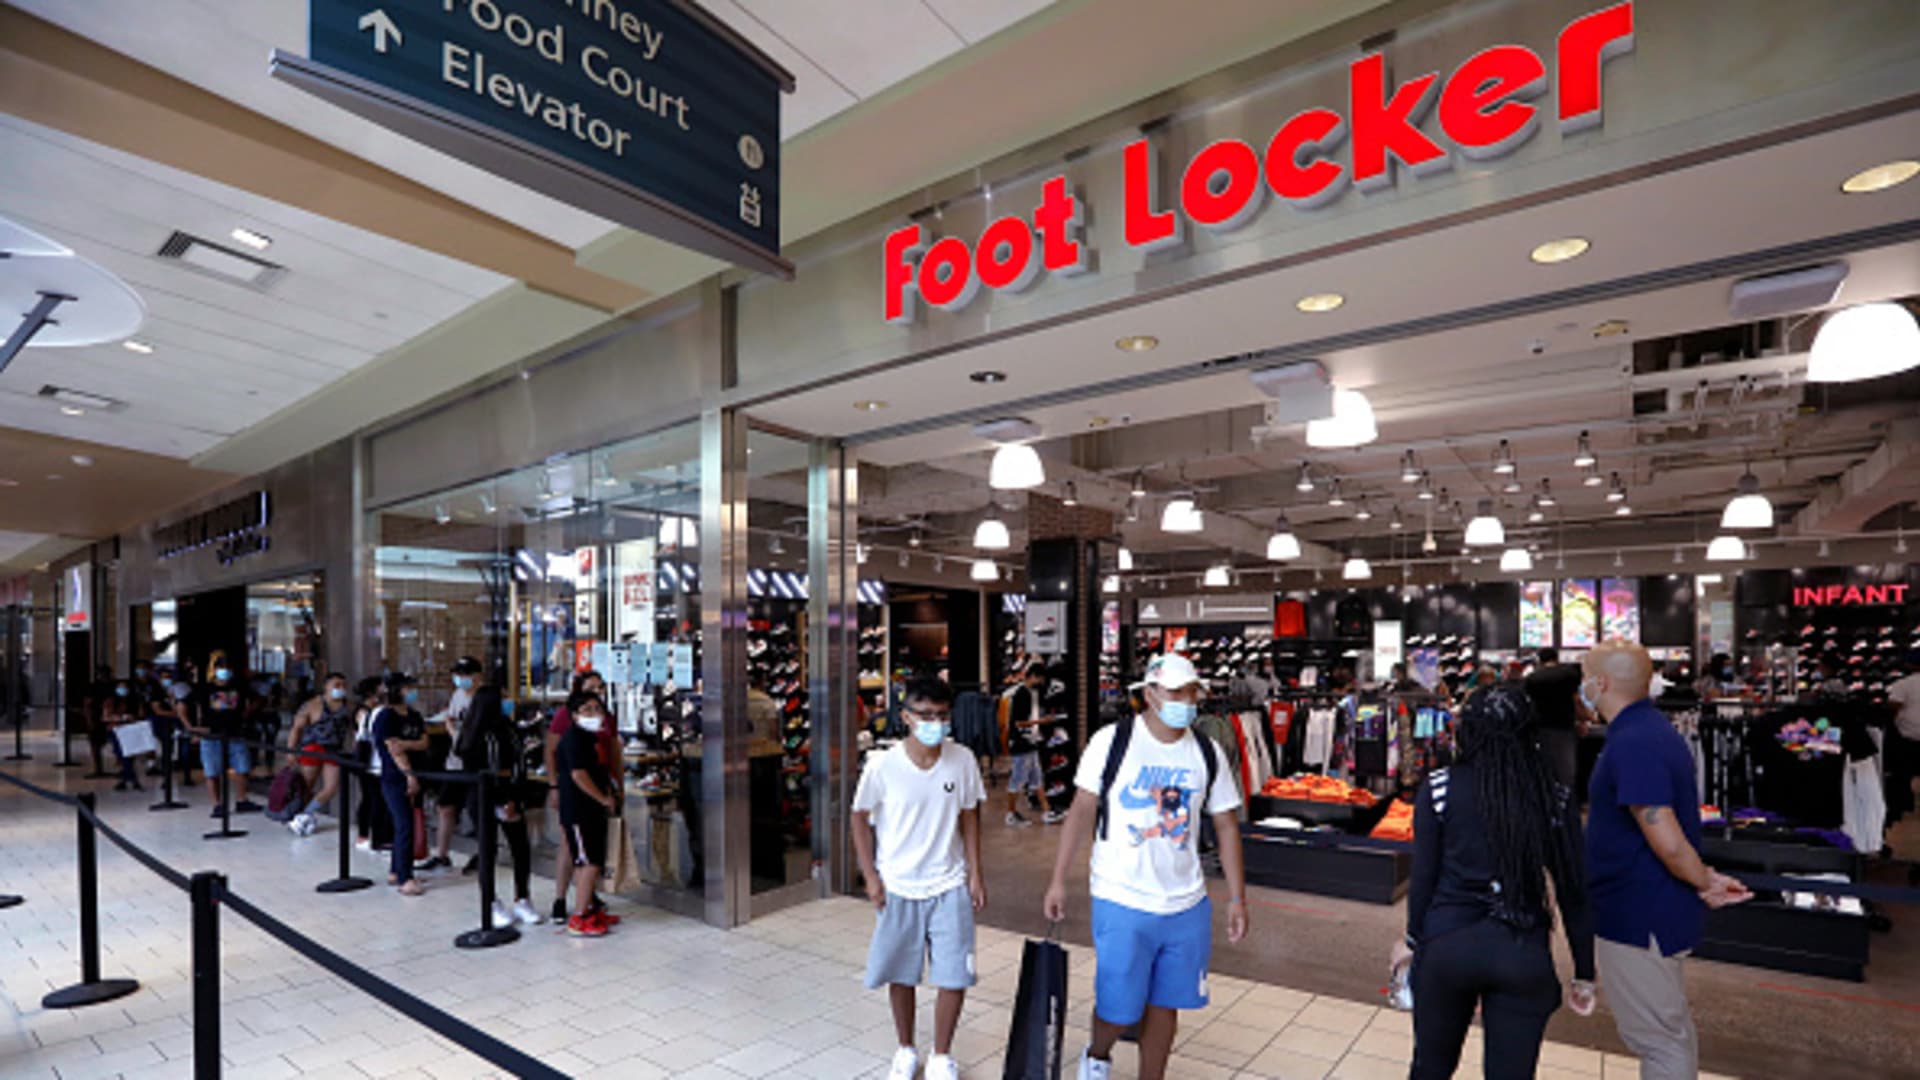 Stay away from Foot Locker's stock despite its cheap valuation, Cowen says